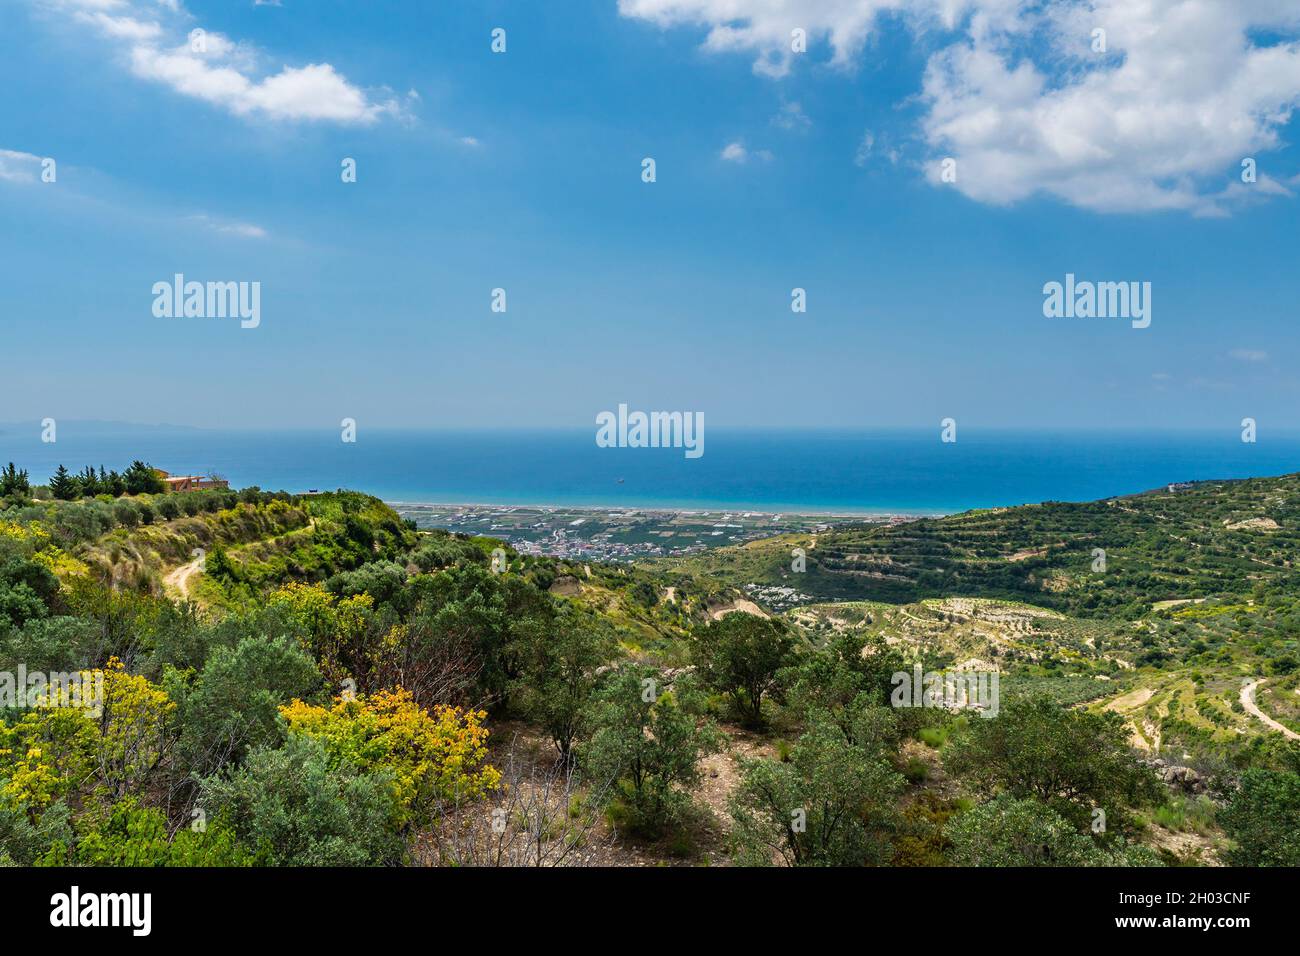 Hayat Samandag Landscape Breathtaking Picturesque View on a Blue Sky Day in Summer Stock Photo